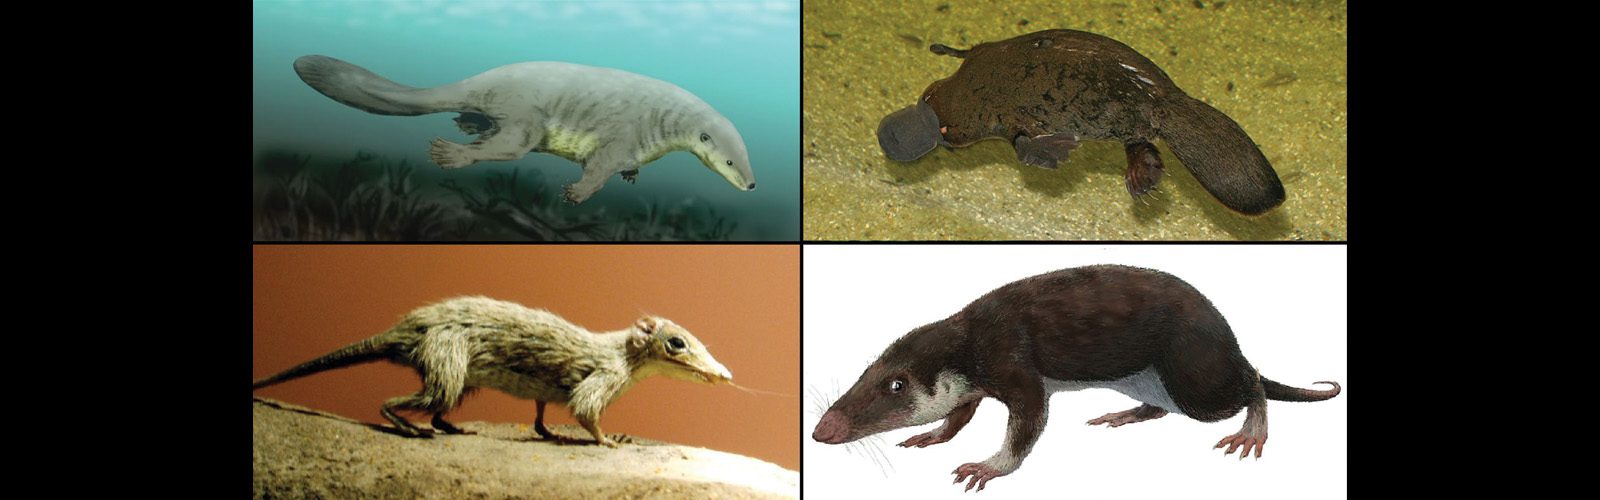 four ancient mammal concept are depicted in panes